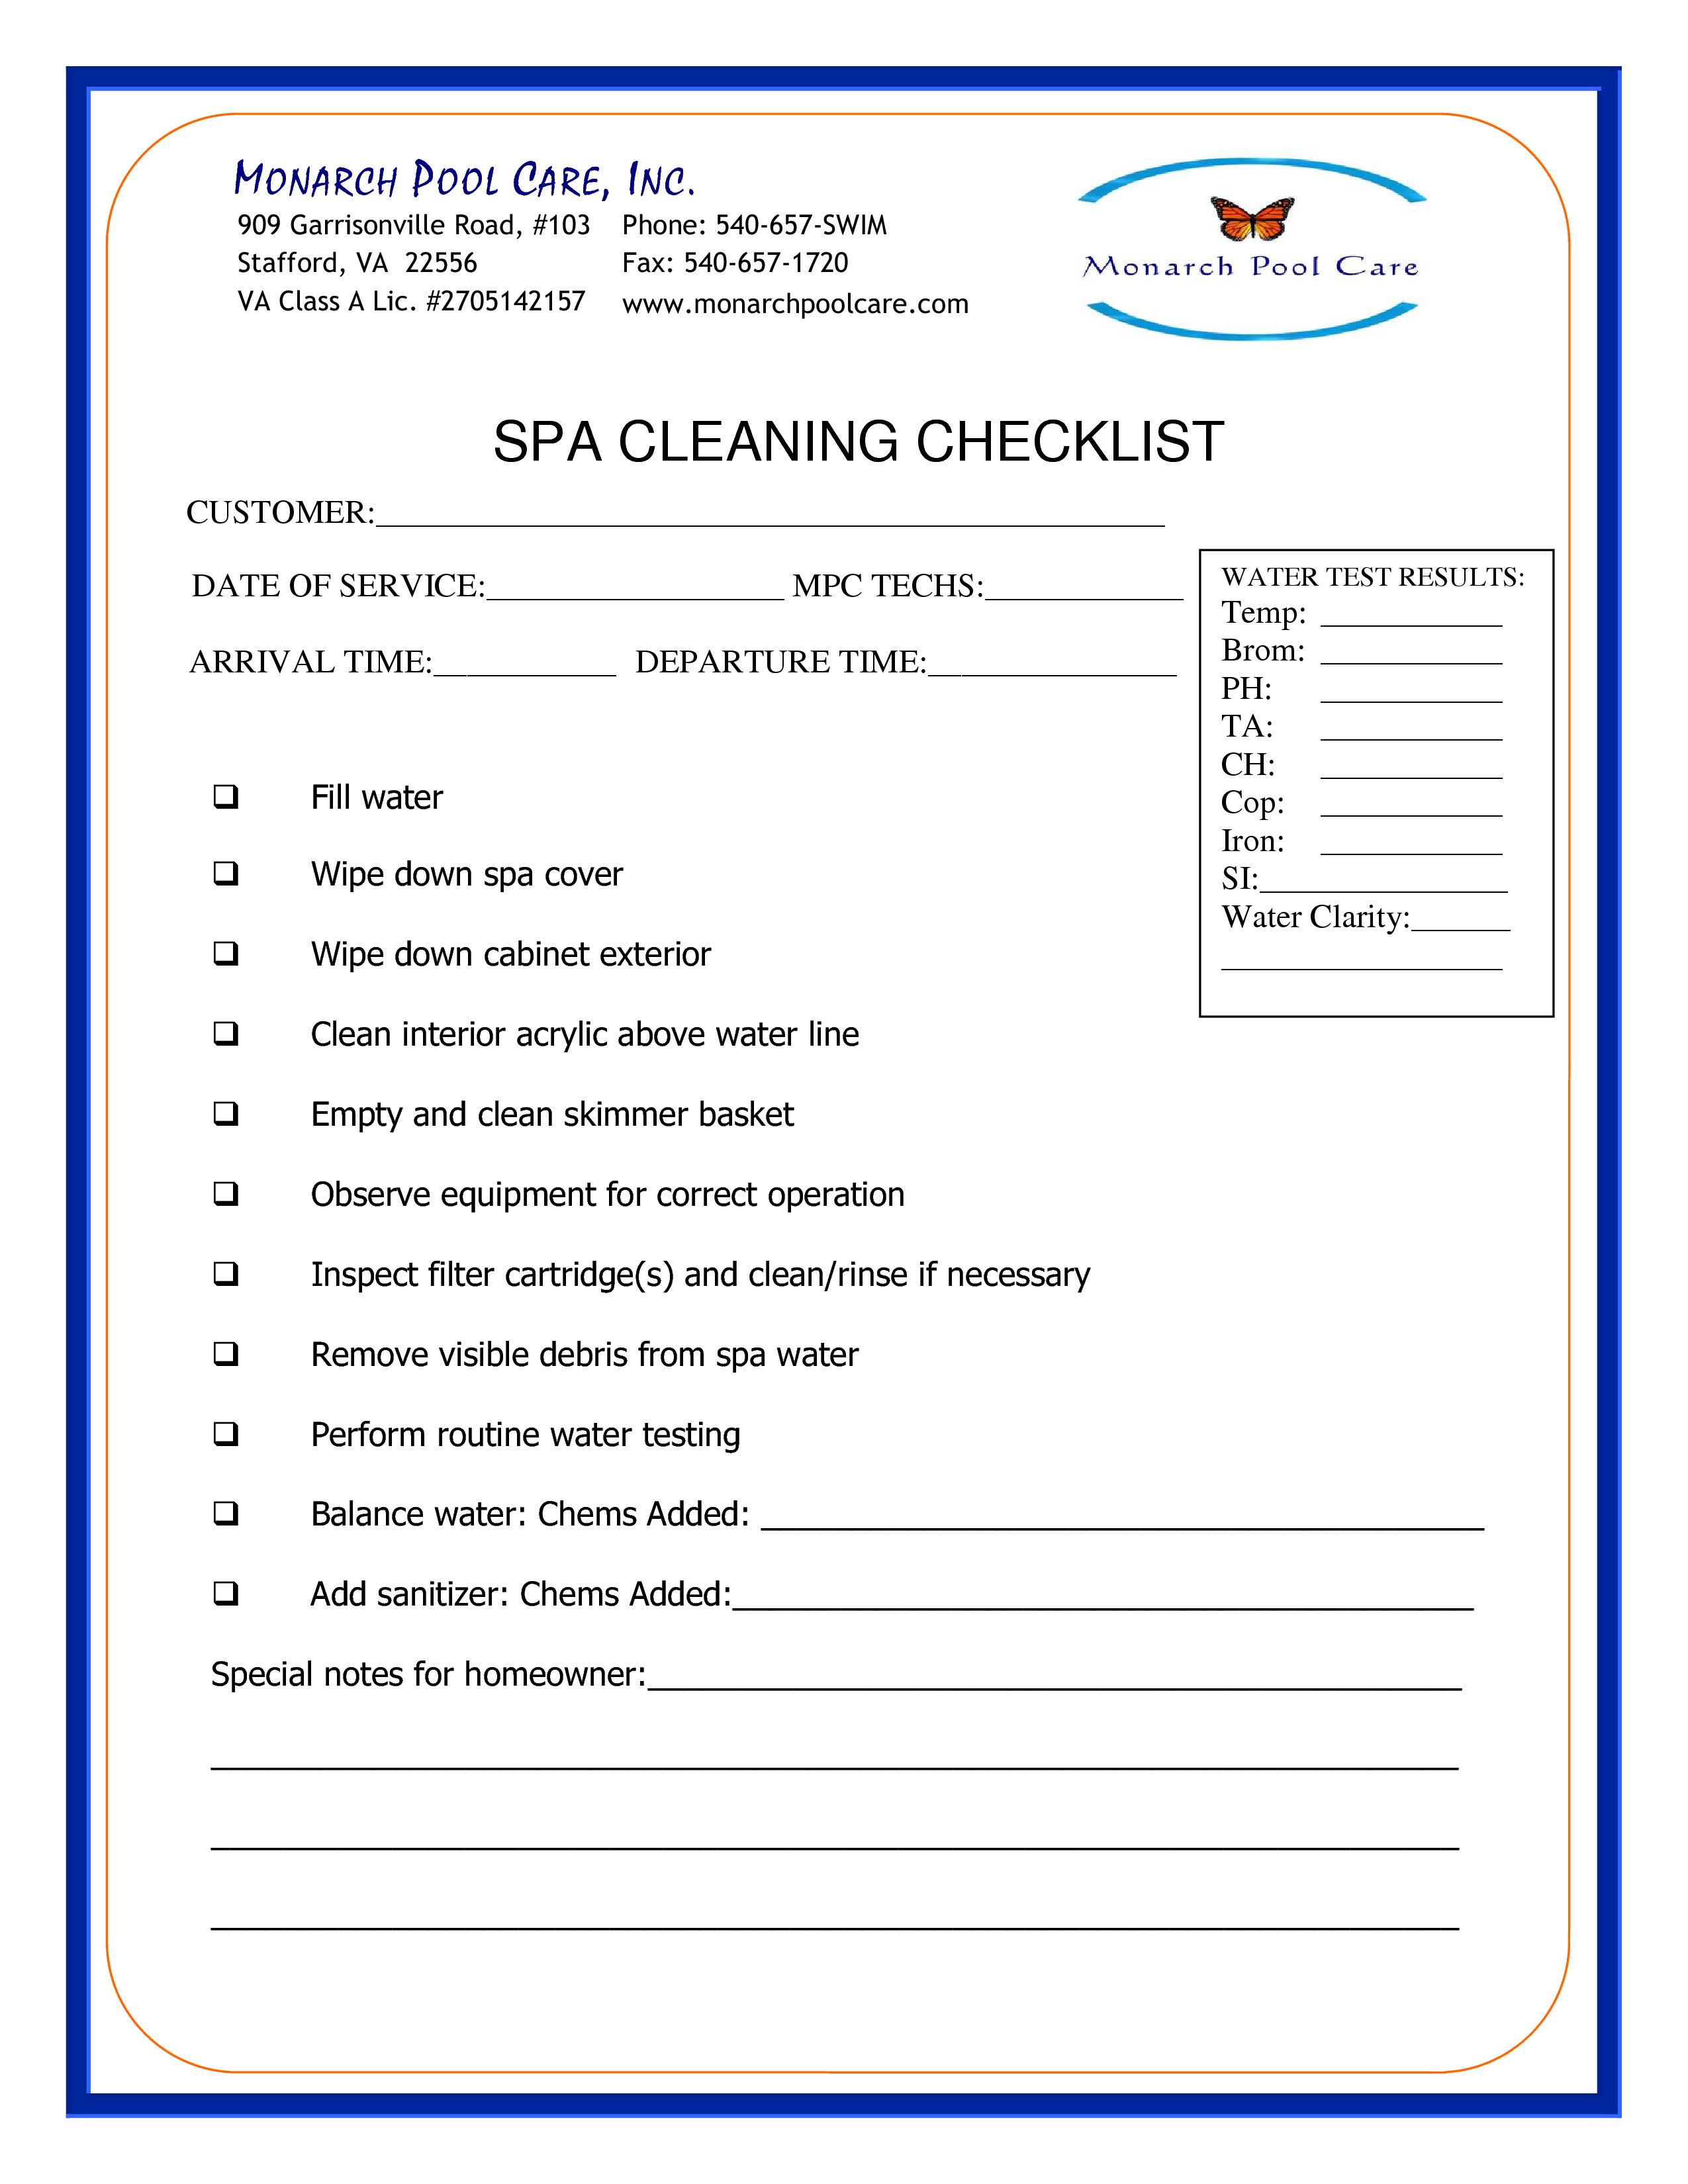 mpc-spa-cleaning-checklist-2018-monarch-pools